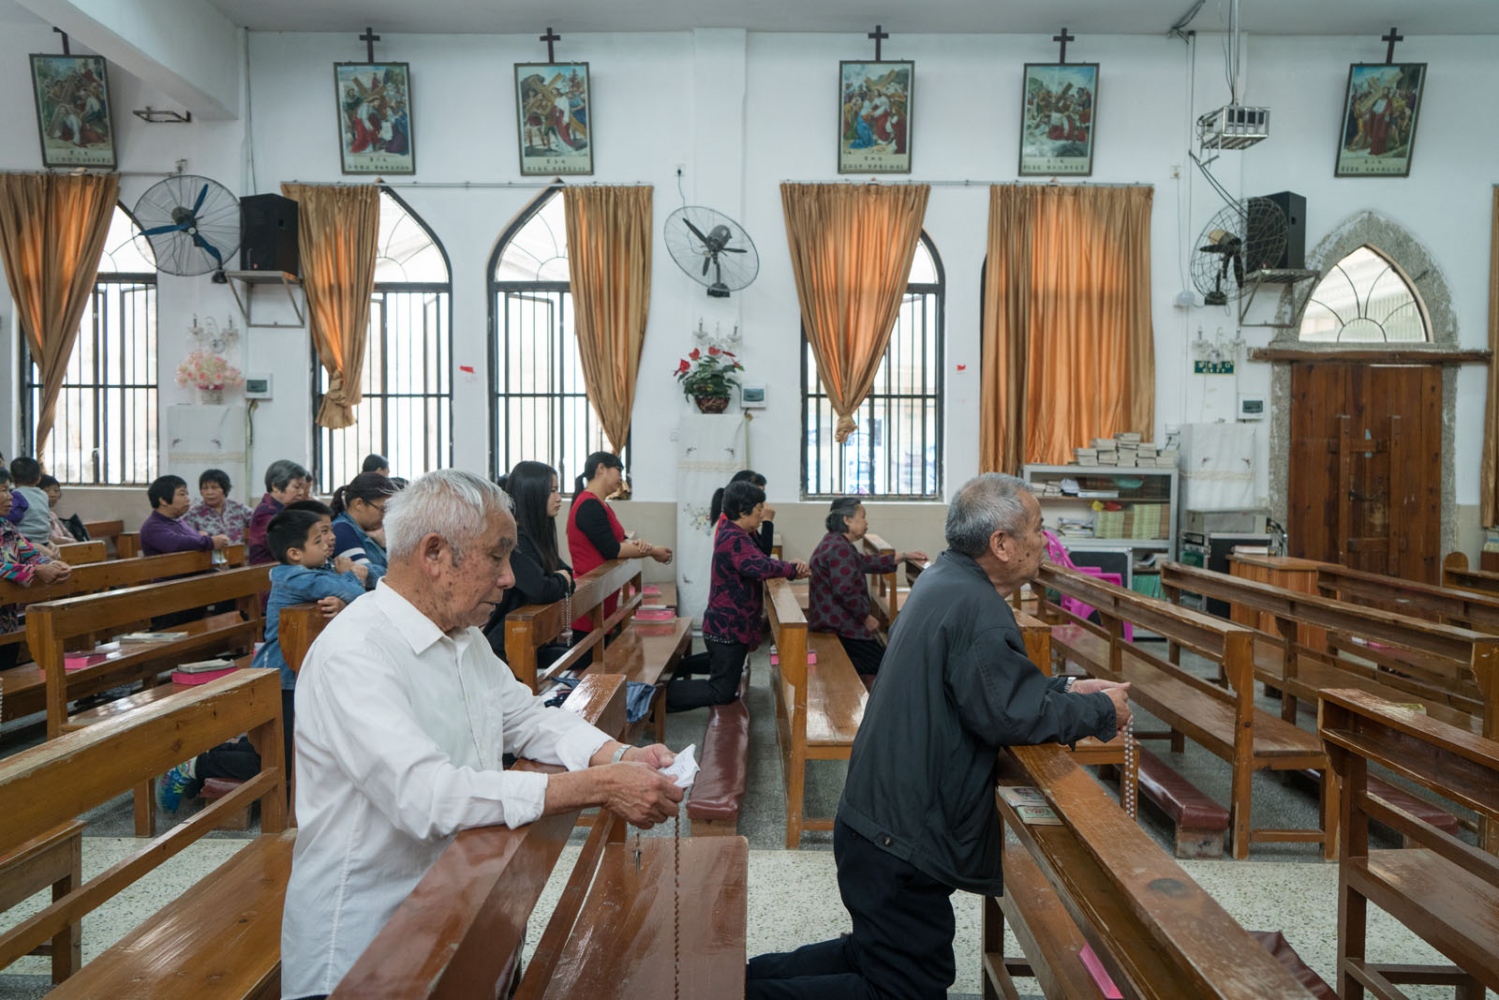 A Rural Chinese Catholic Village - Catholics from nearby villages pray and chant in Bobei...